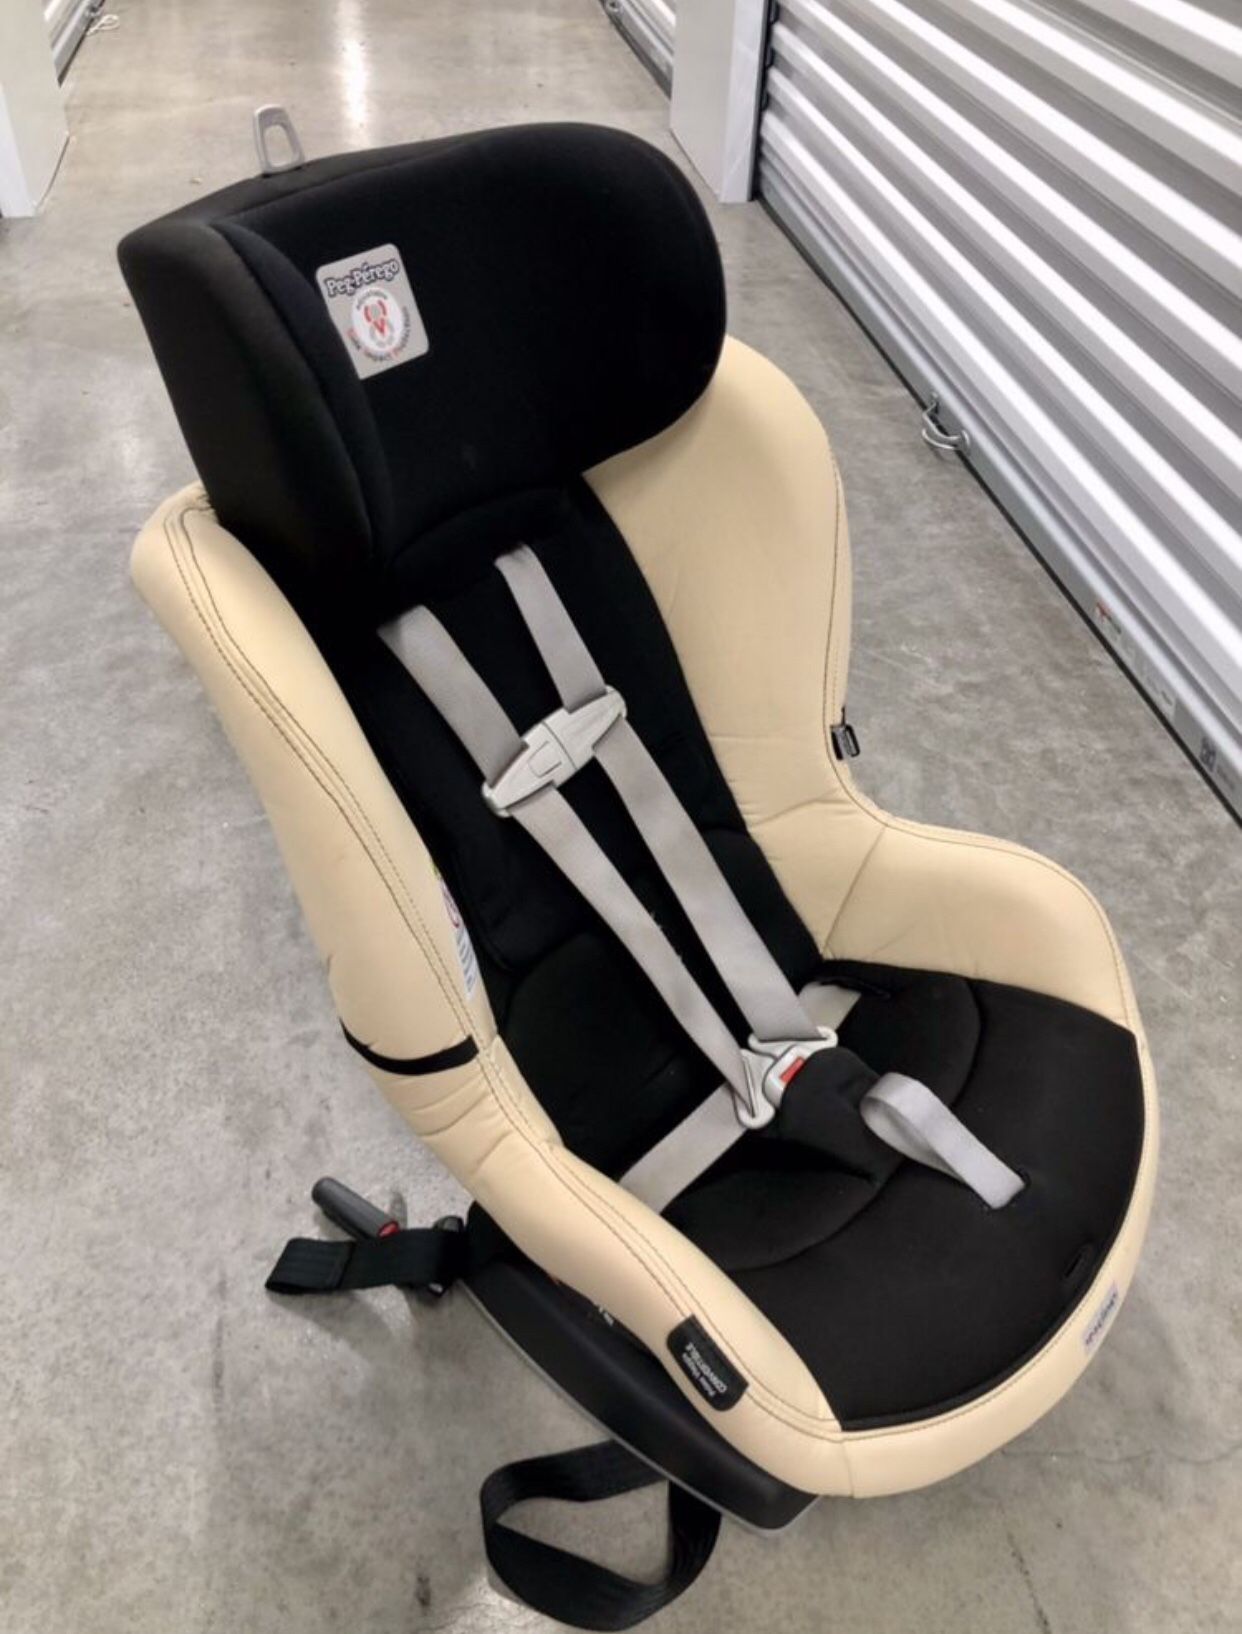 Made In Italy - Peg Perego Primo Viaggio 5-65 SIP Convertible Leather Car Seat LUXURY MODERN ITALIAN Stylish Chic Baby